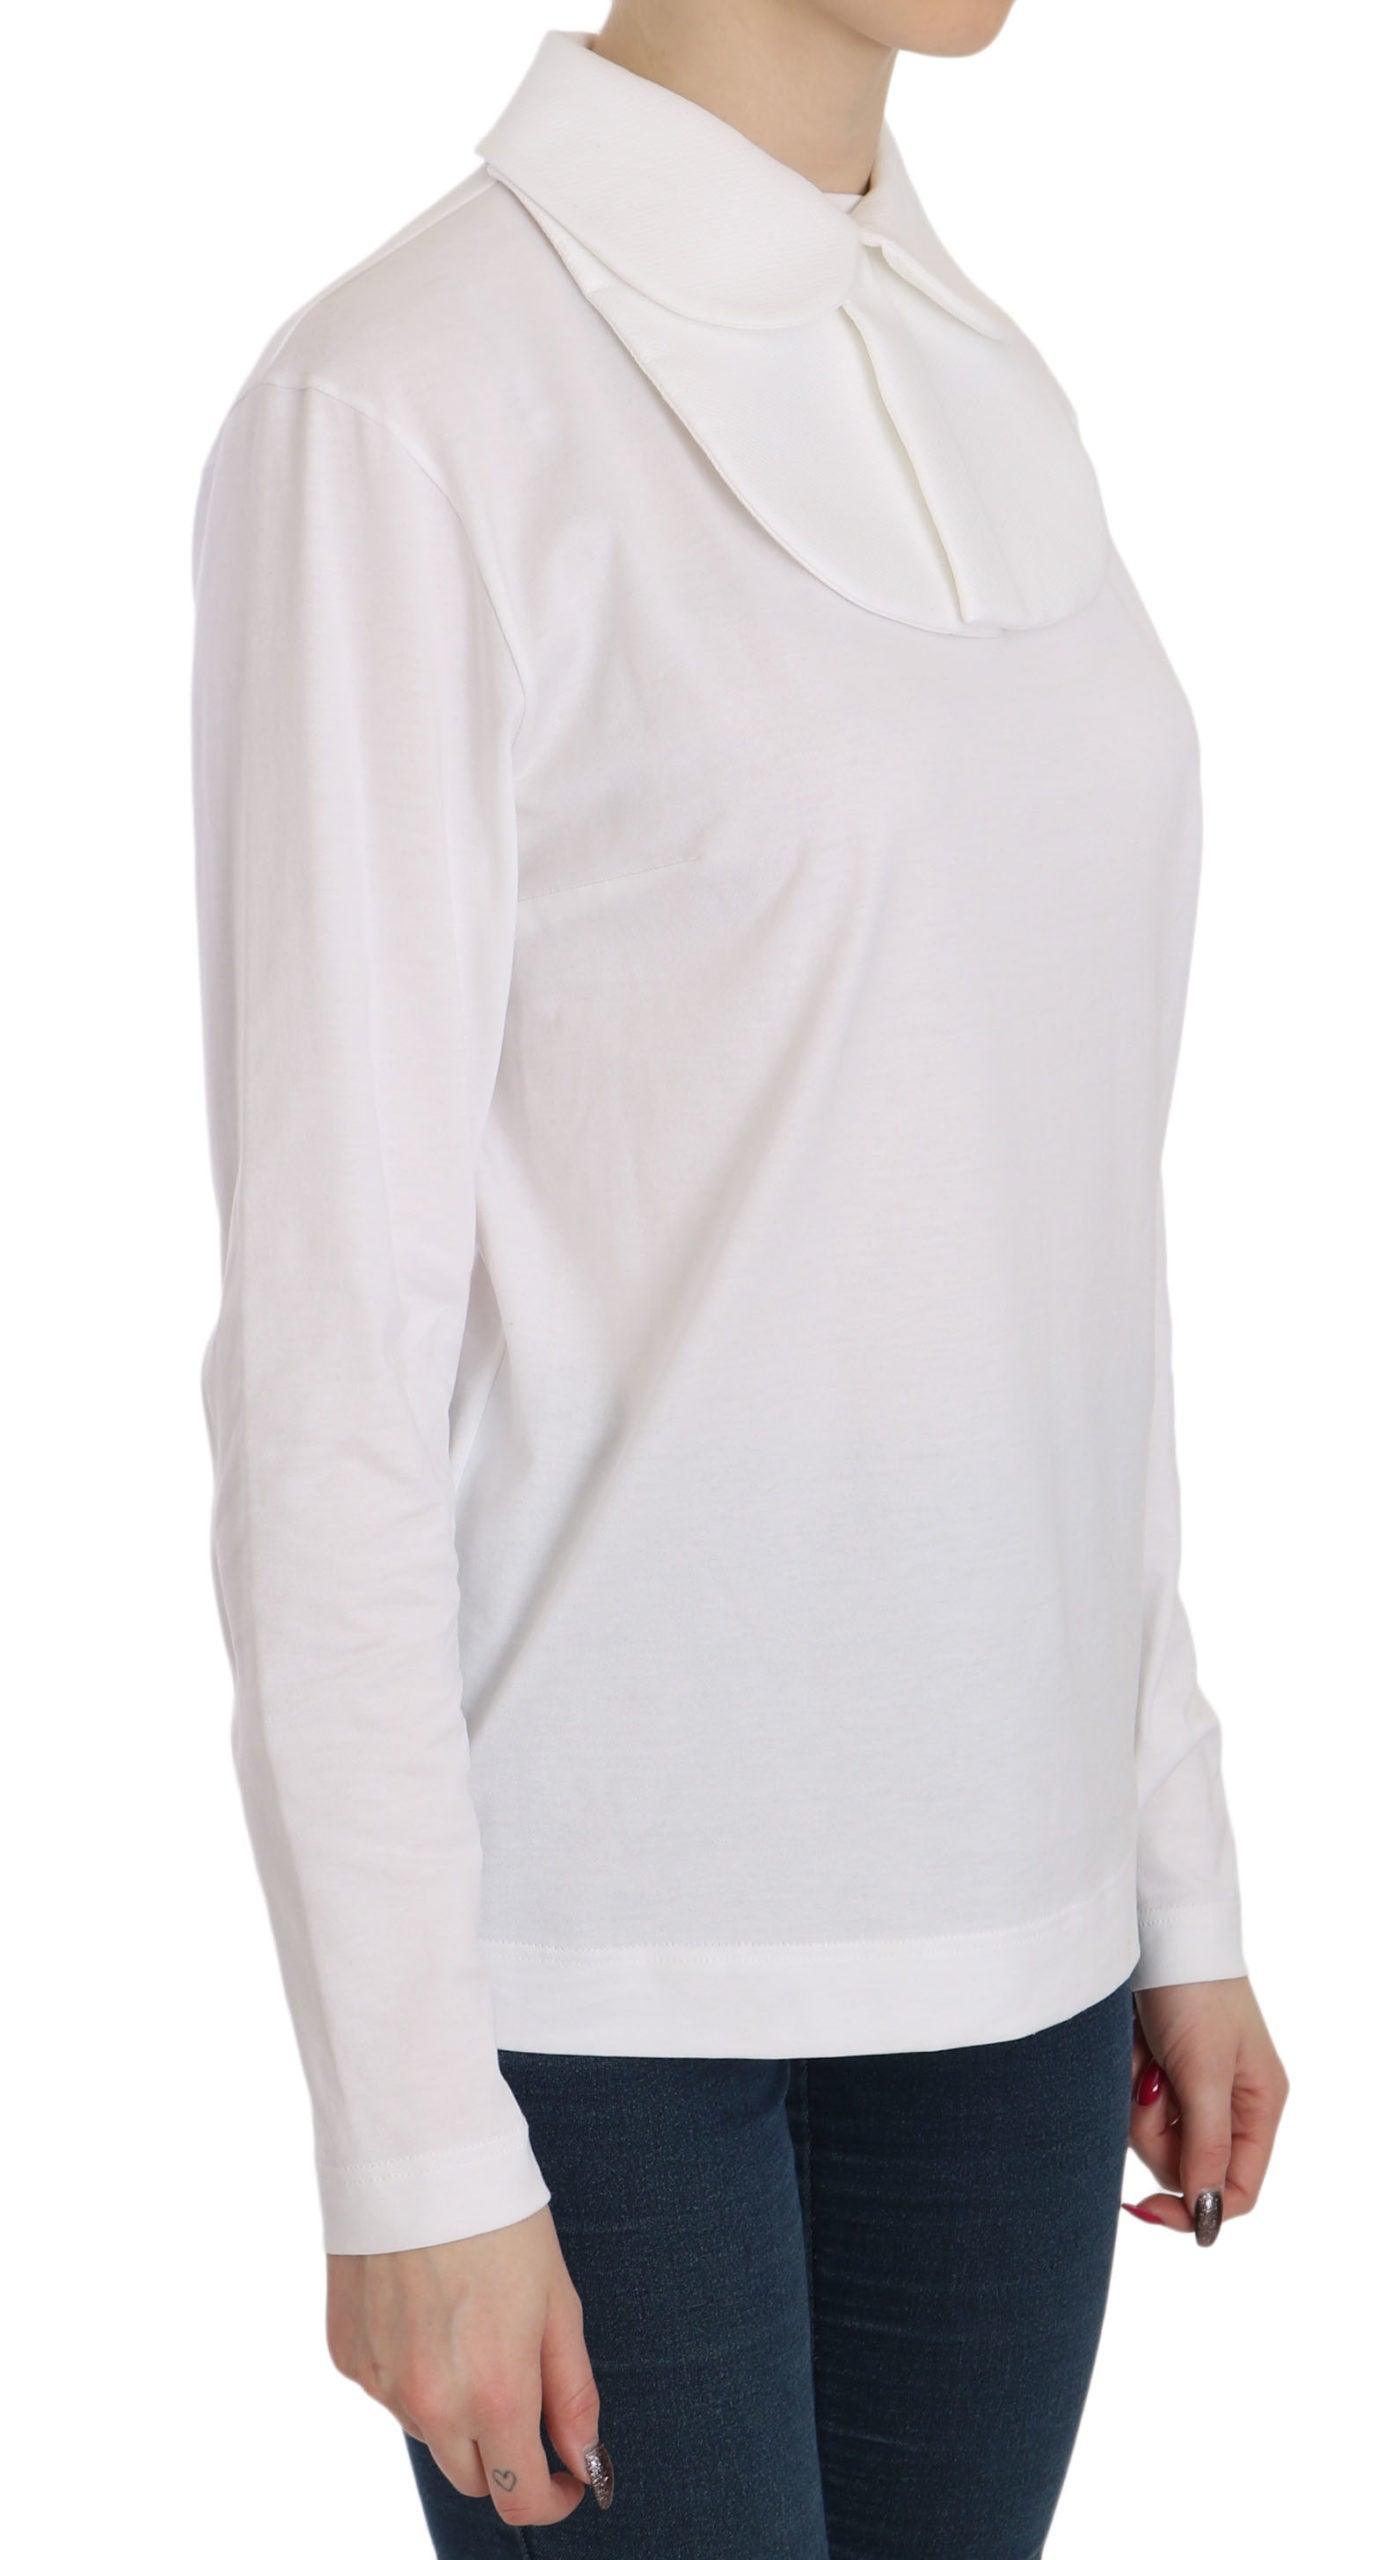 White Cotton Longsleeve Collared Top Blouse